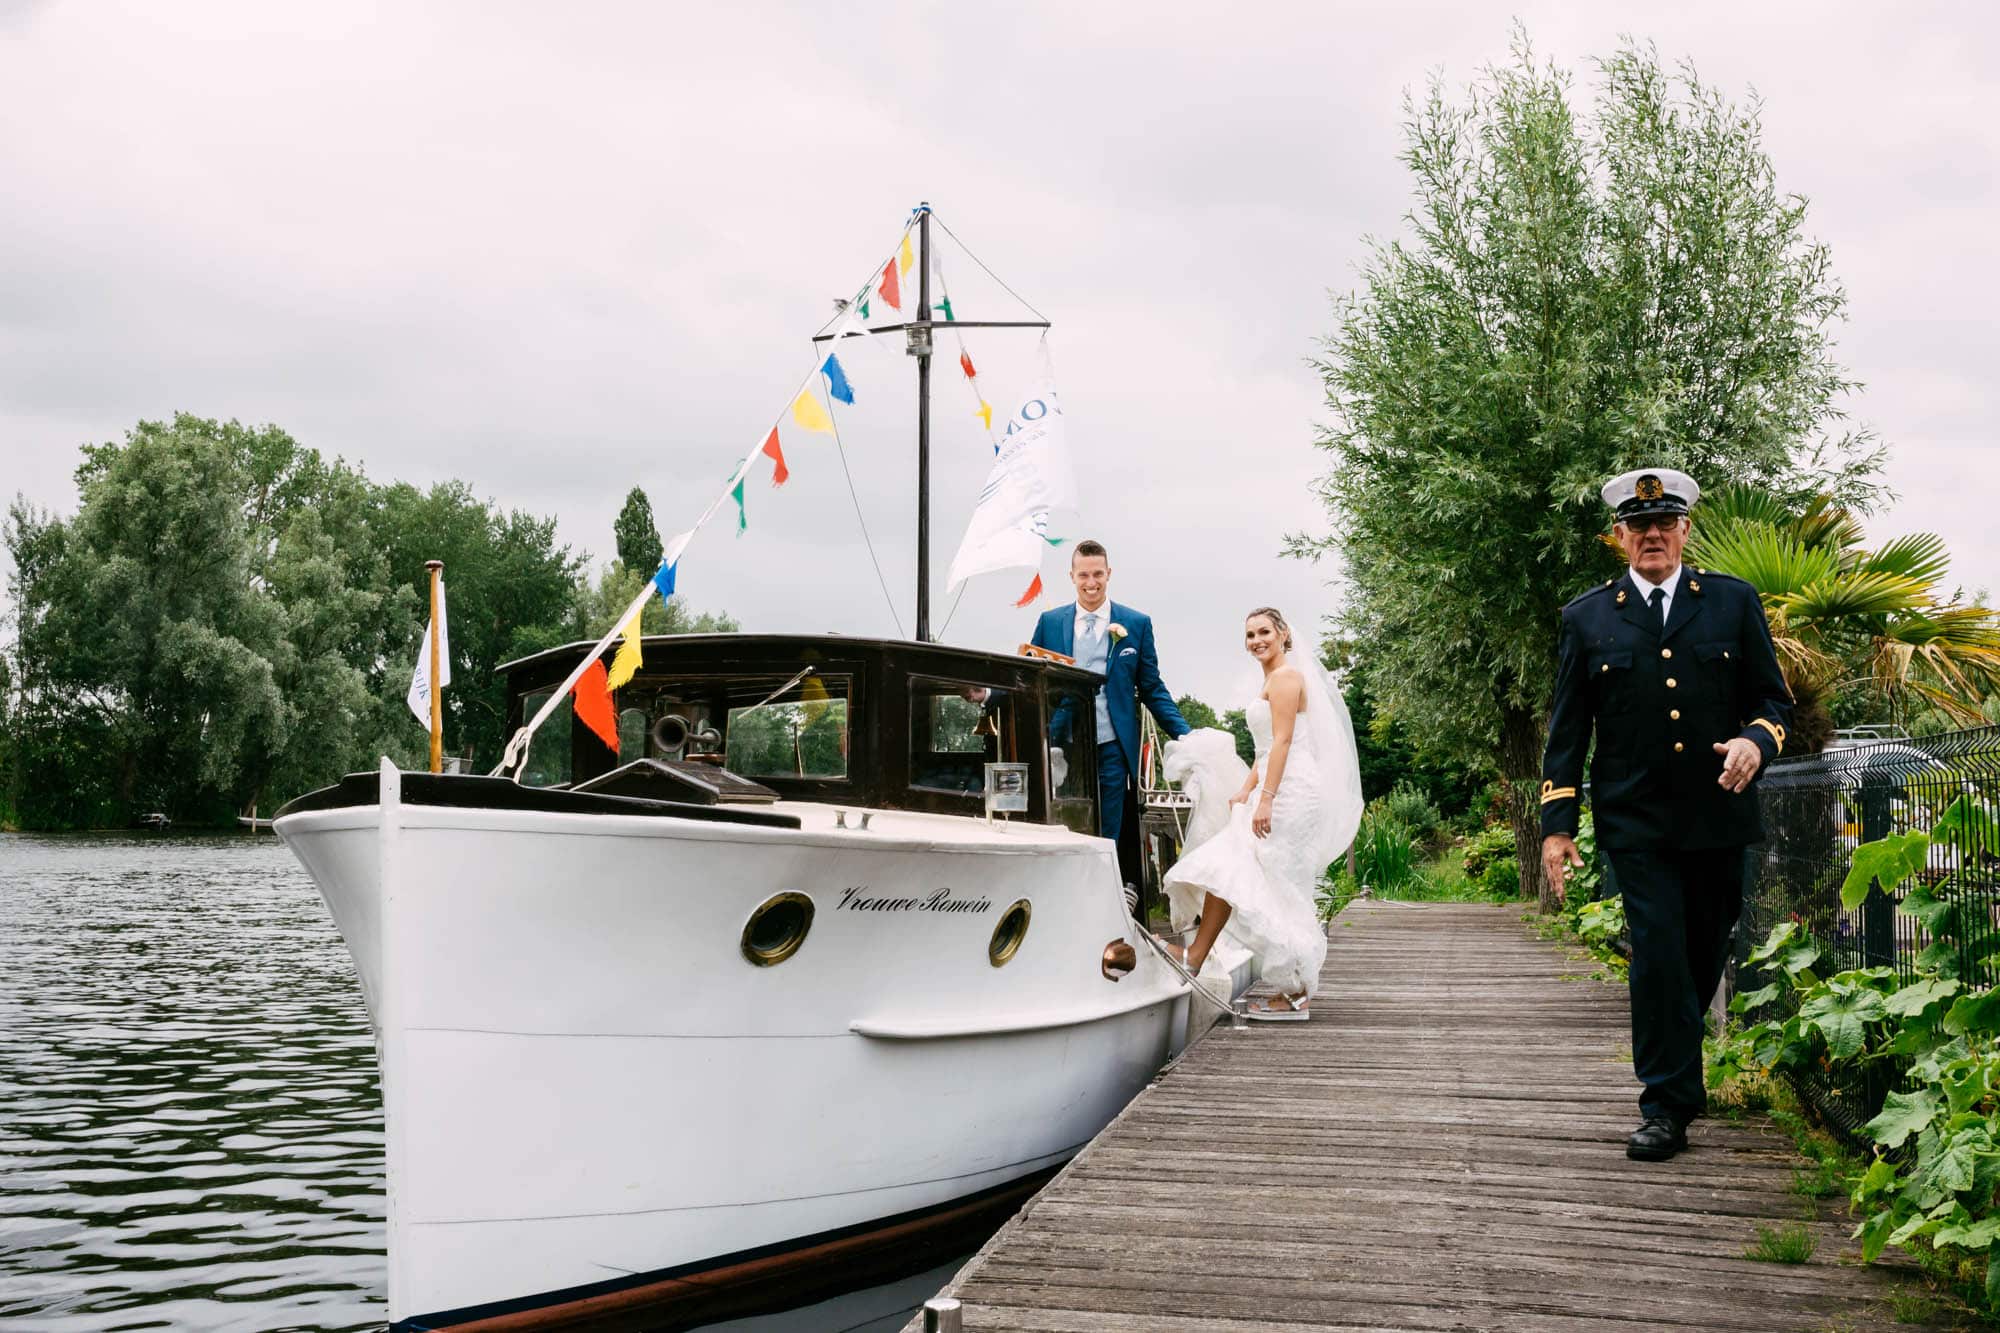 A man and woman celebrate Weddings in Rotterdam as they walk a boat on a quay.